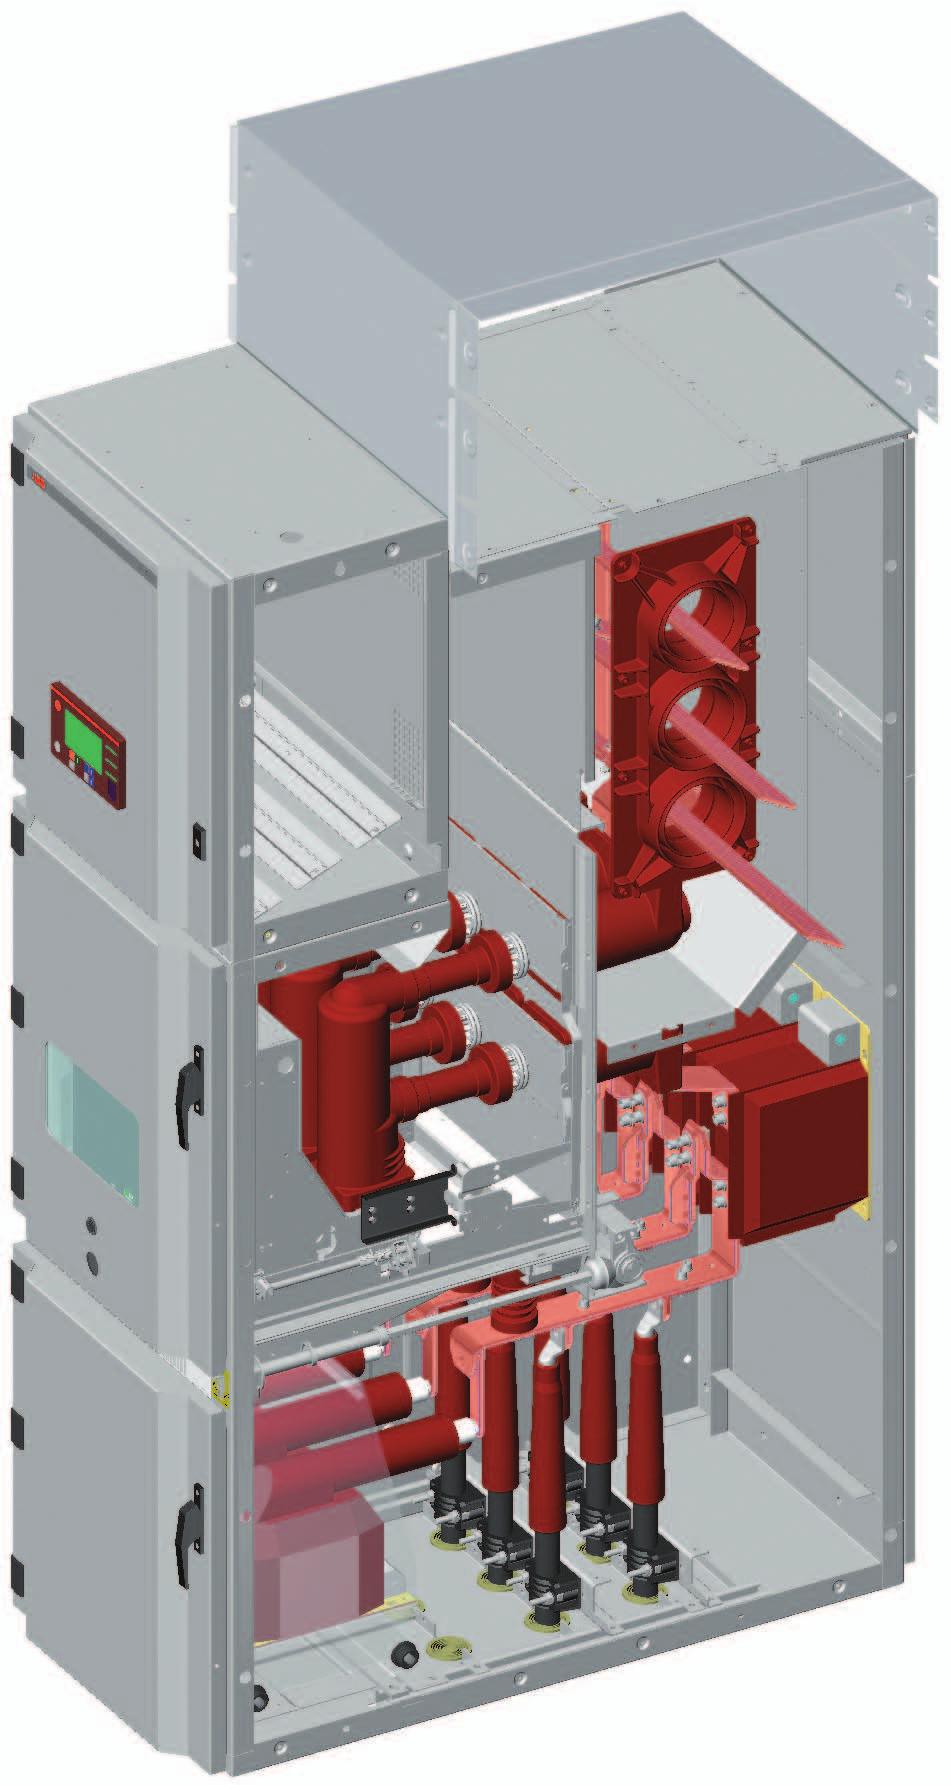 If a high voltage compartment requires tools for opening, then this is normally a clear indication that the users should take other measures to ensure safety and possibly to ensure performance